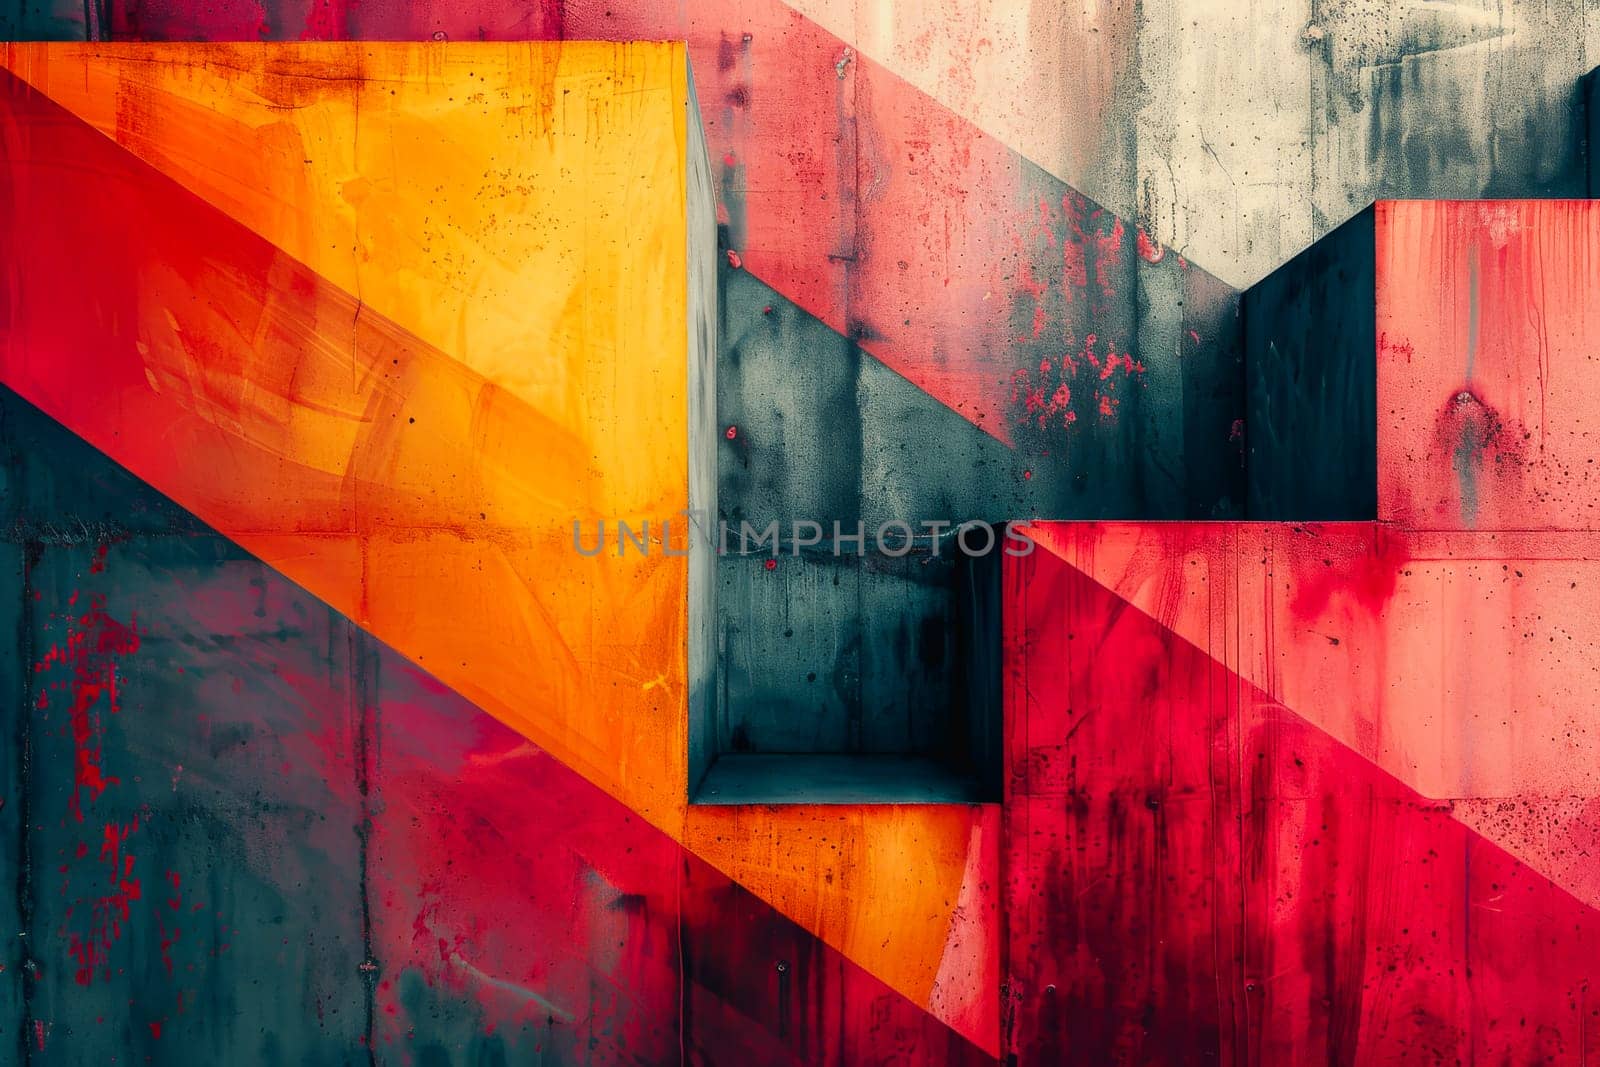 abstract background, minimal textures copy space concepts.